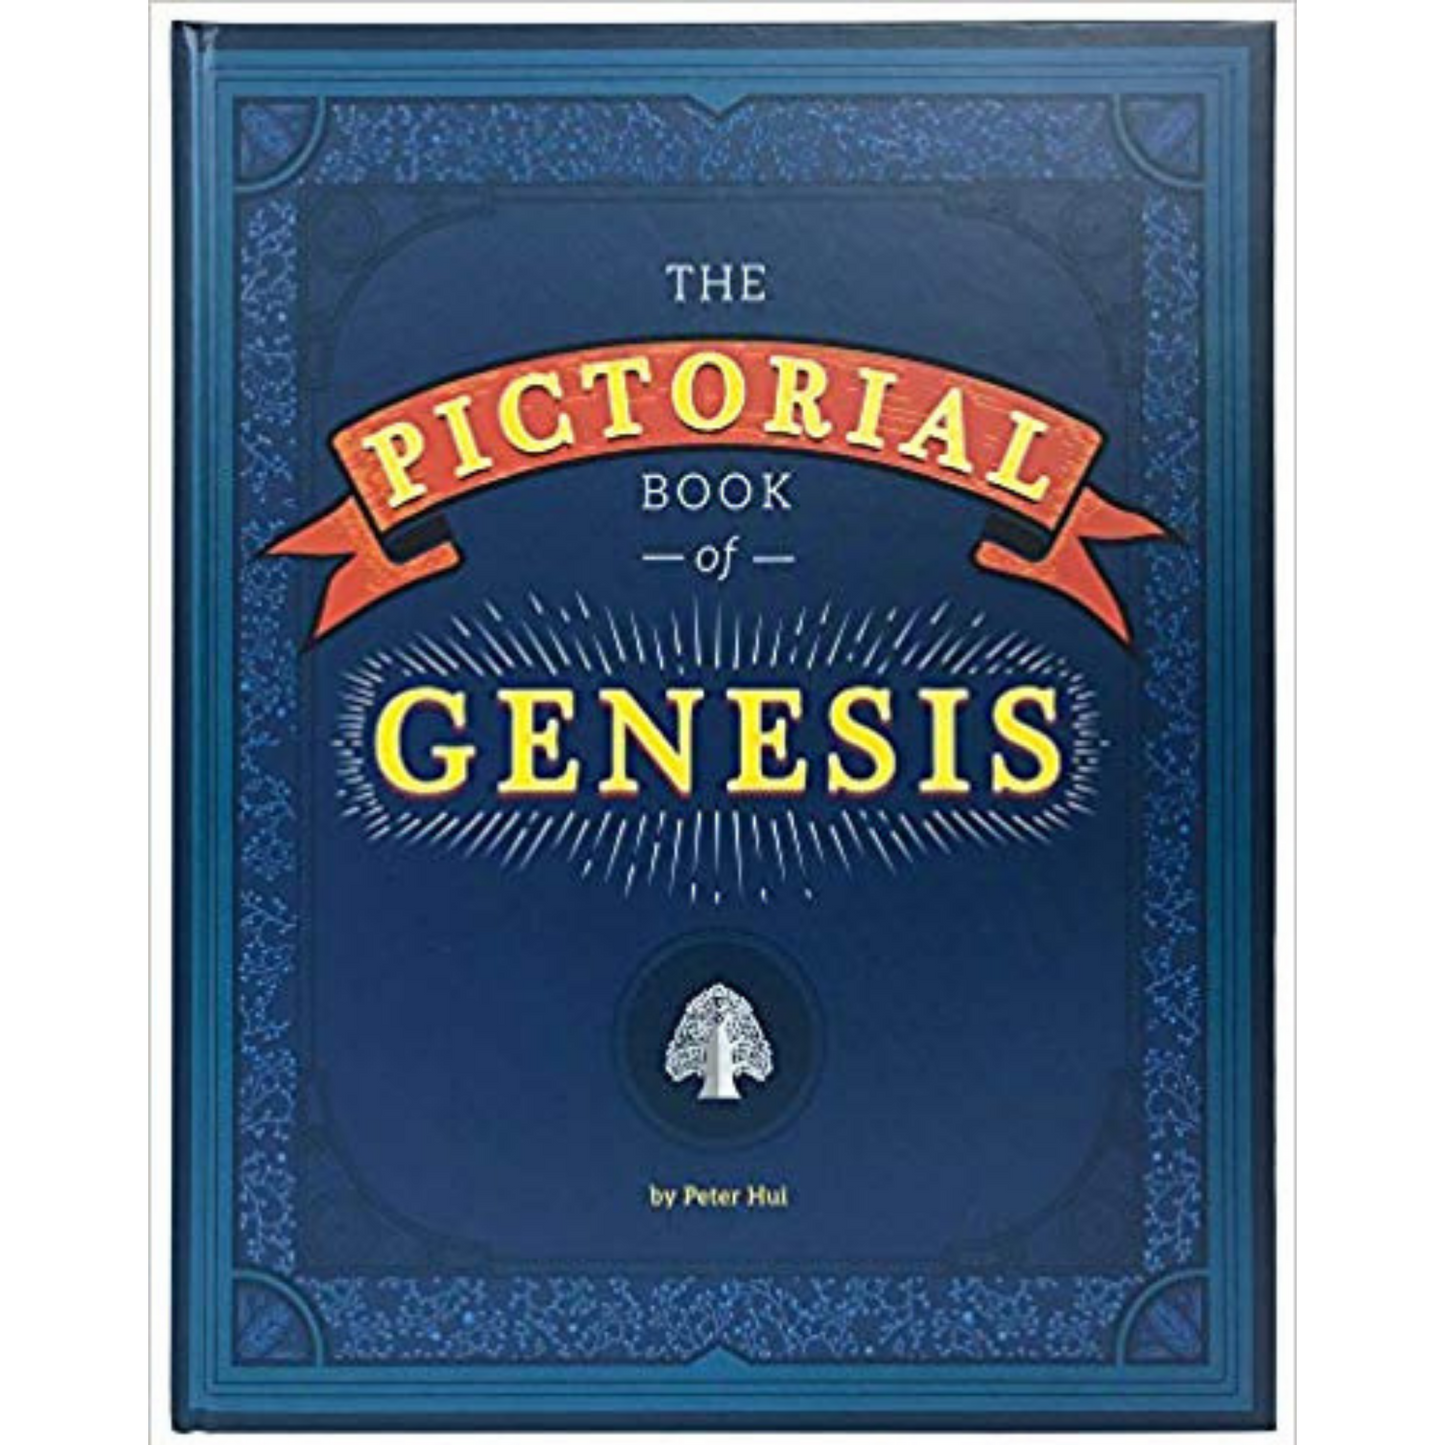 The Pictorial Book Of Genesis